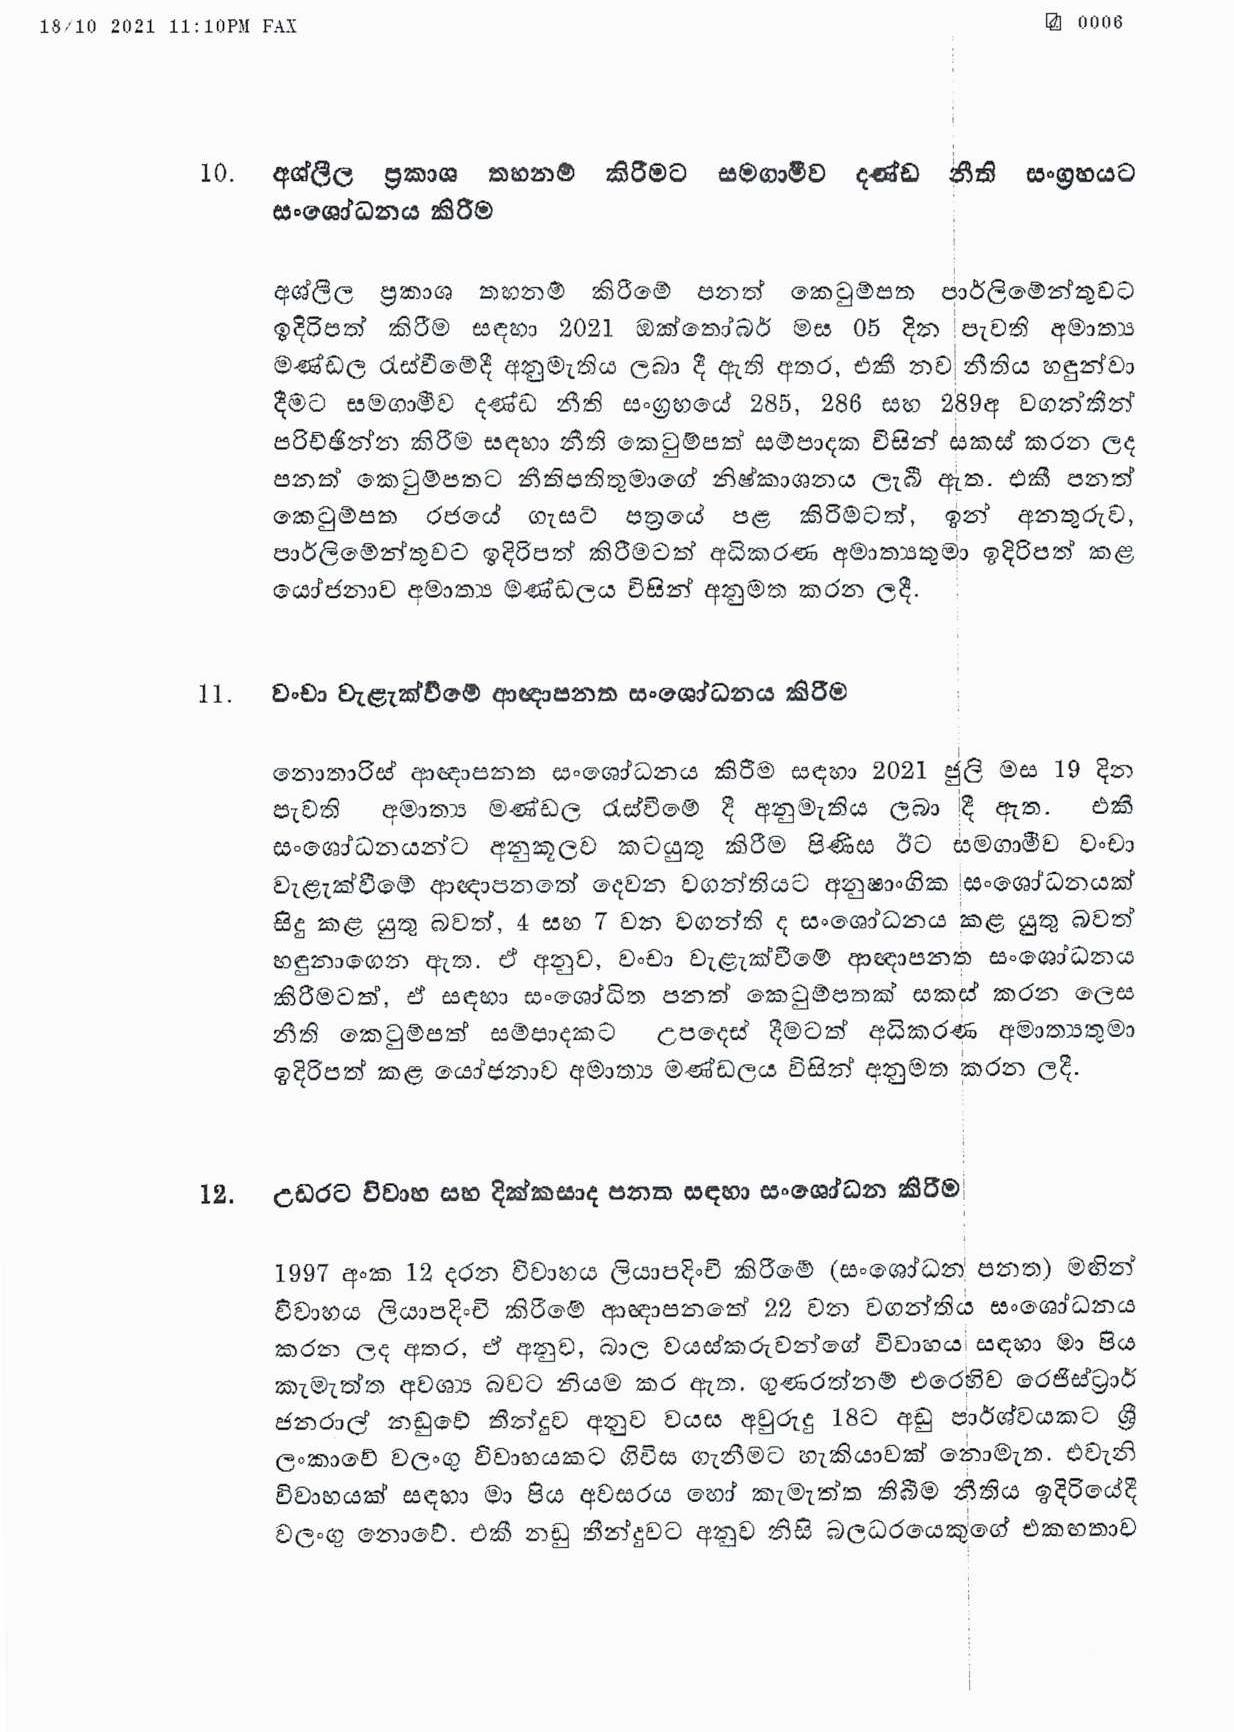 Cabinet Decision on 18.10.2021 compressed page 006